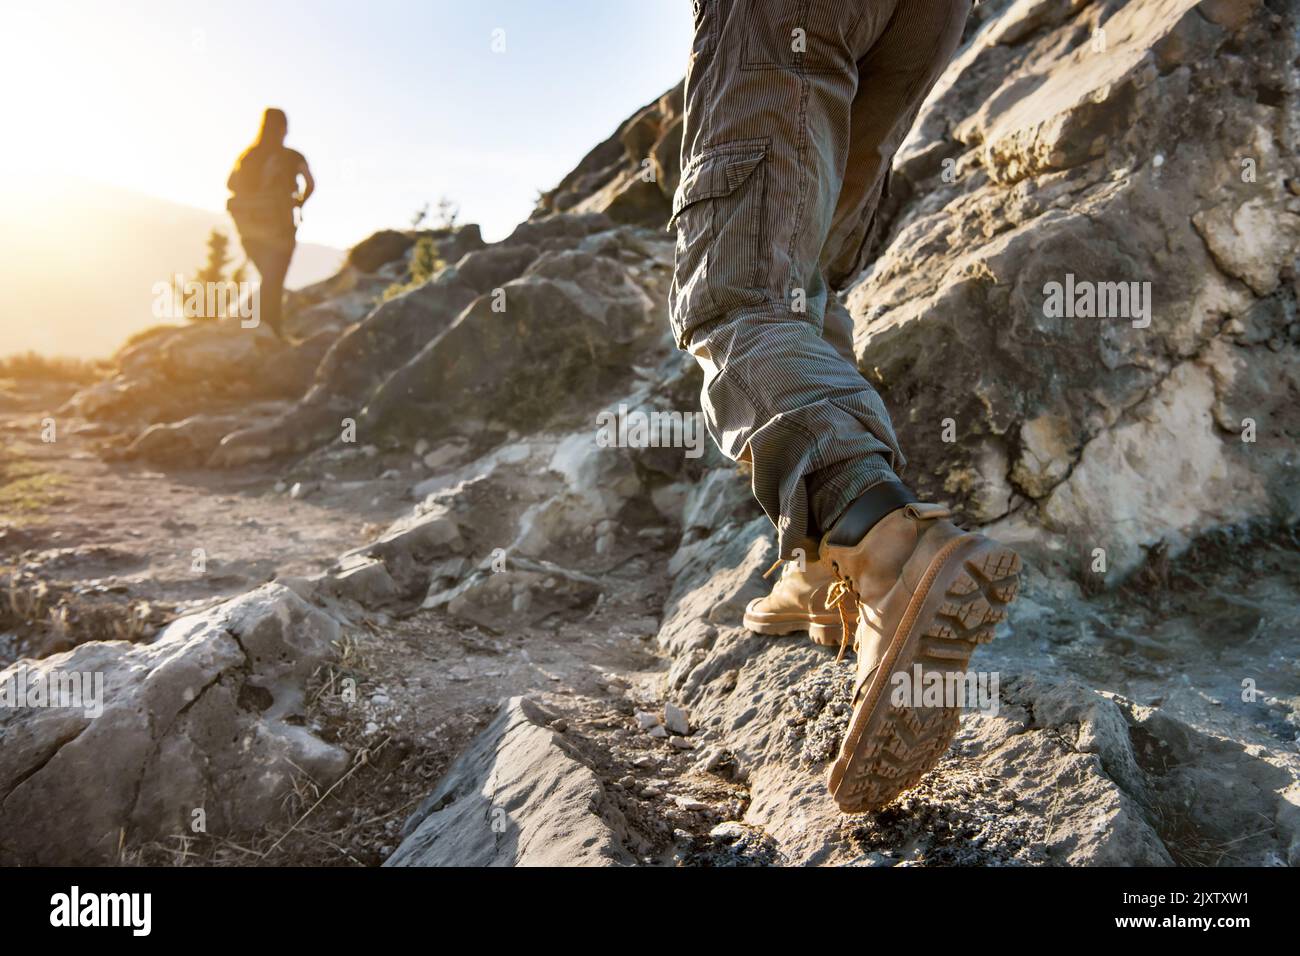 Closeup photo of male hiker legs and blurred female tourist with backpack walking at trail Stock Photo